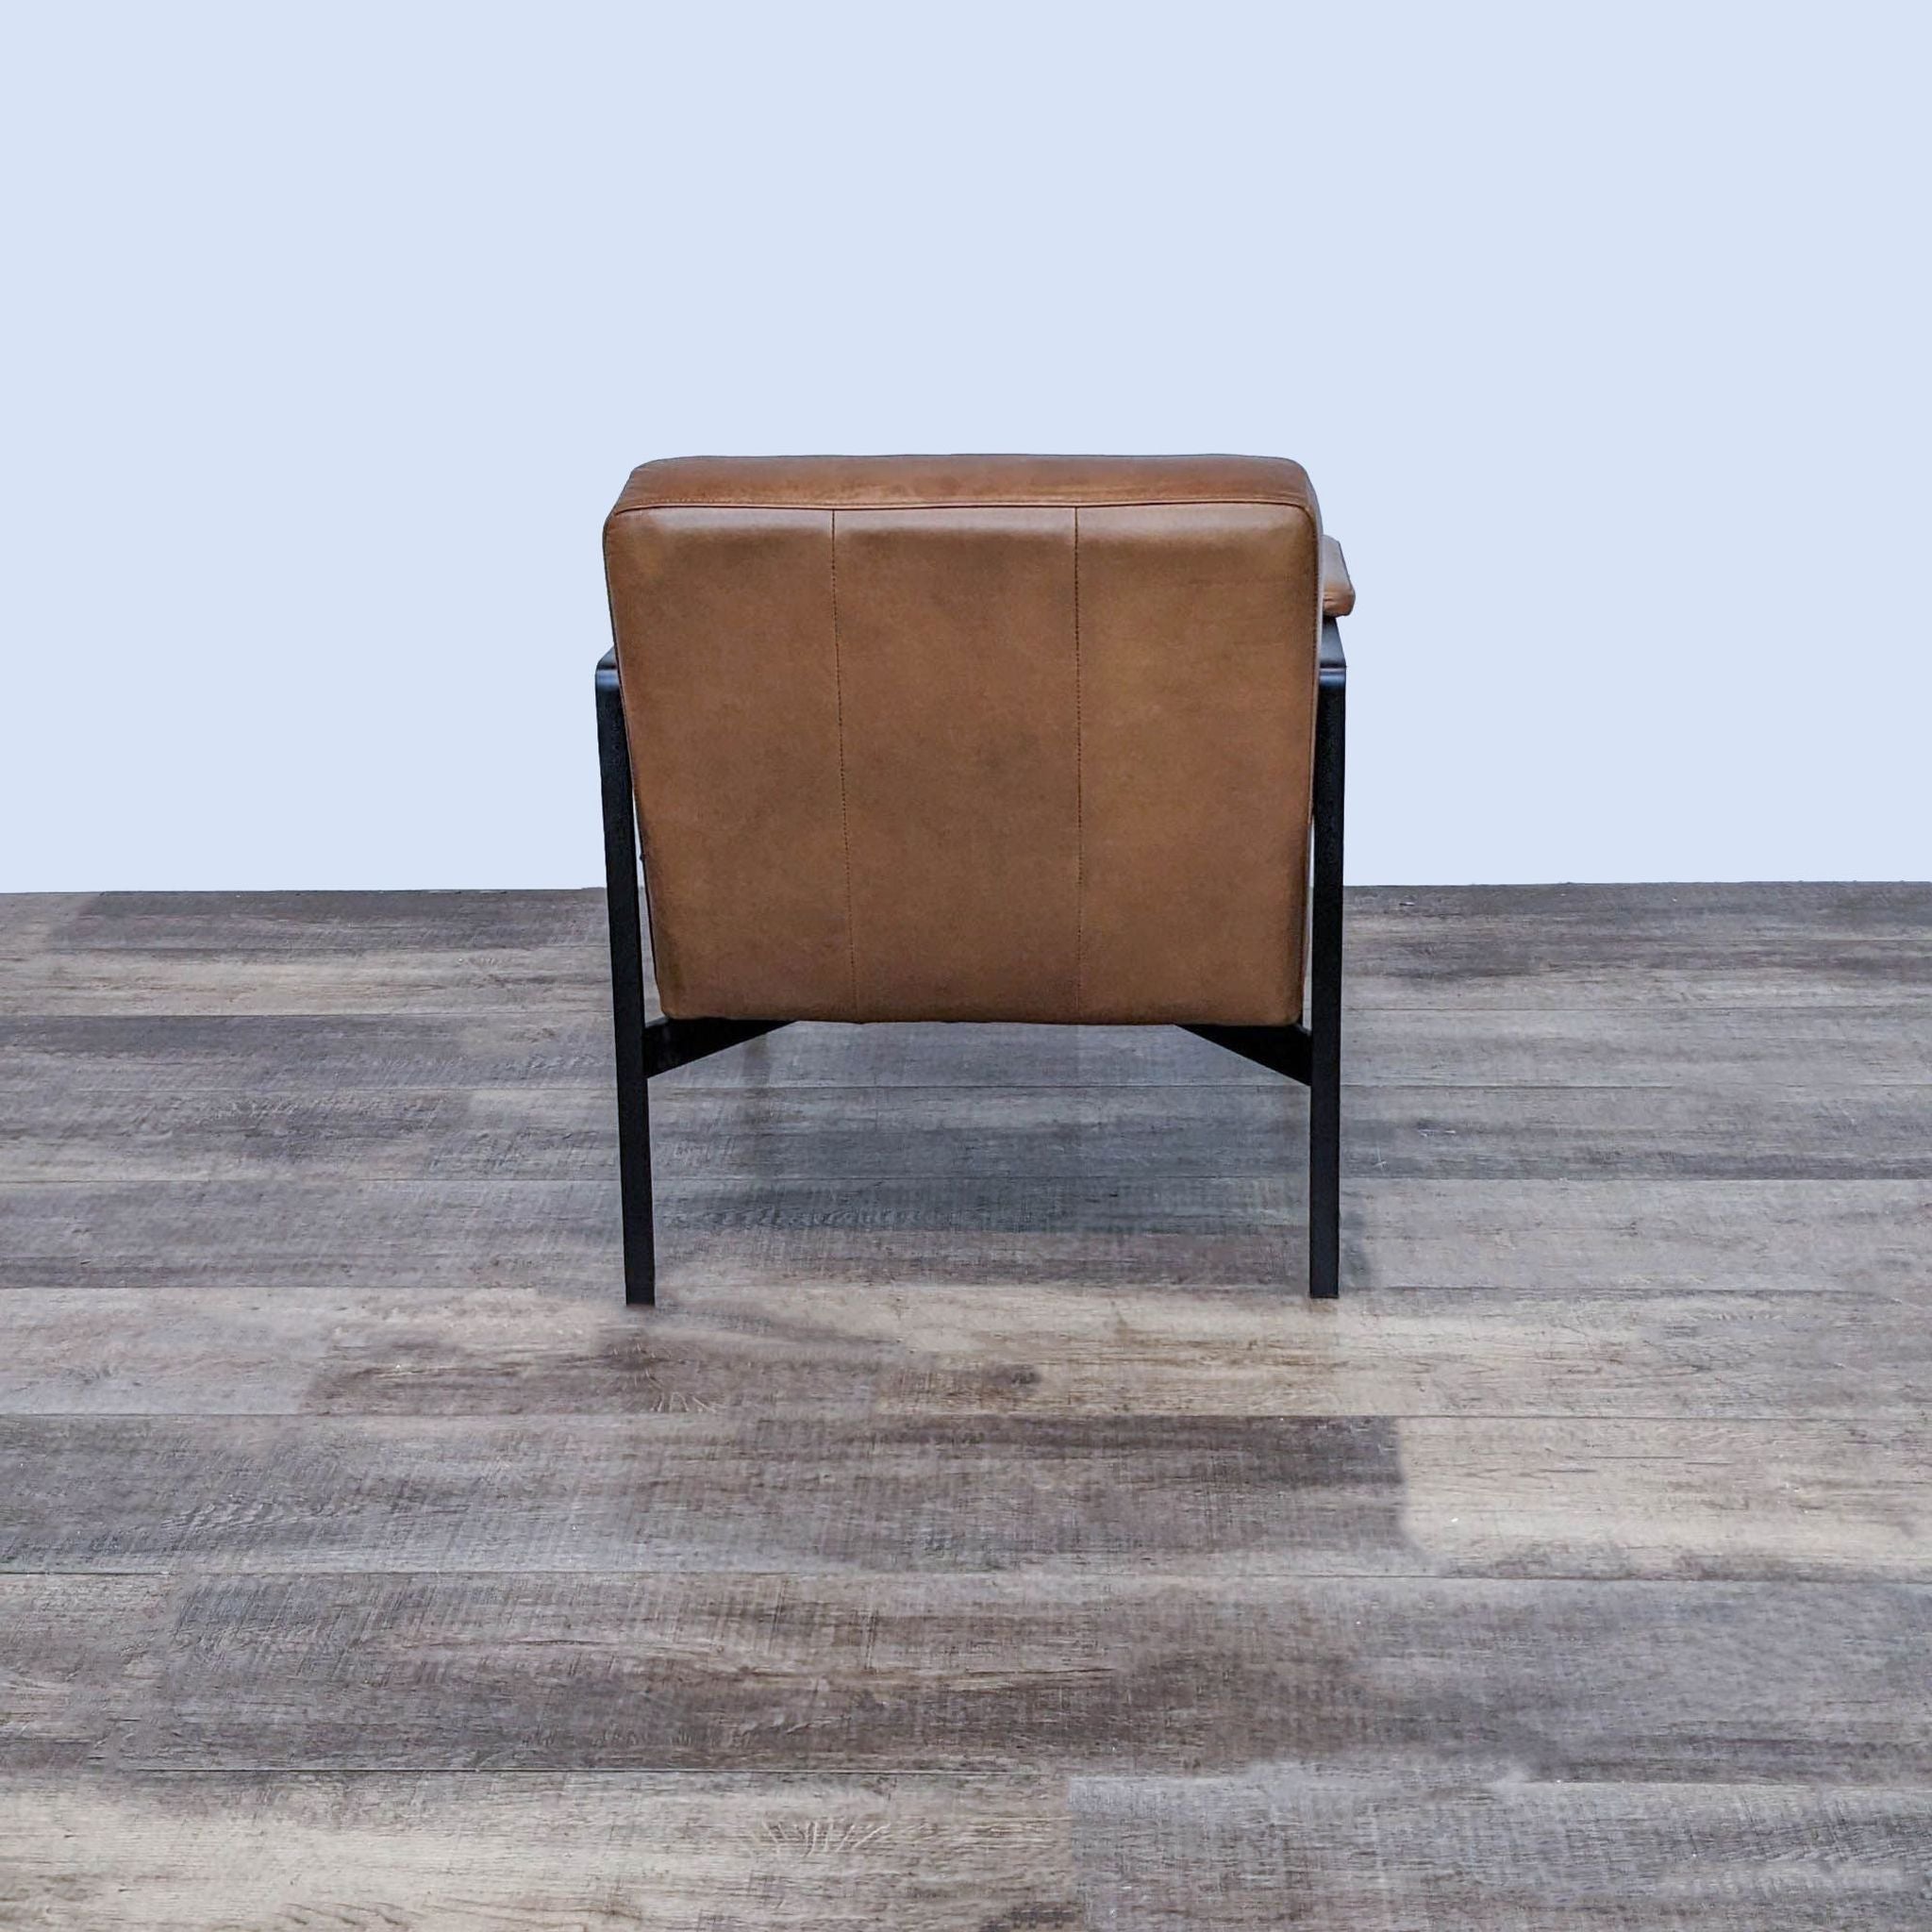 West Elm Highline chair with top grain leather seat and padded arms on a steel base, FSC-certified wood frame, on wooden floor.